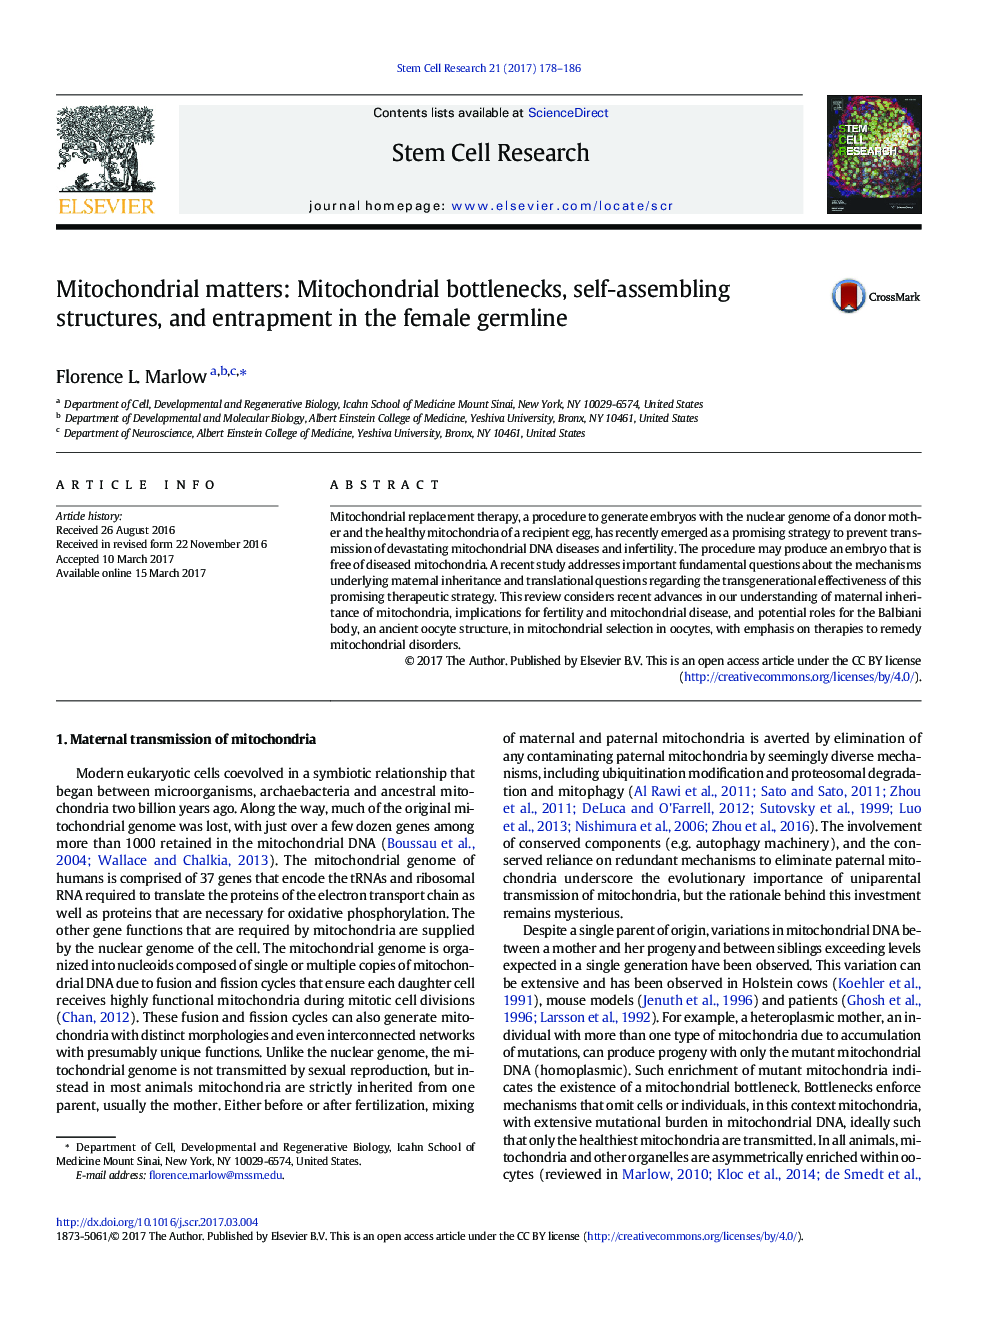 Mitochondrial matters: Mitochondrial bottlenecks, self-assembling structures, and entrapment in the female germline